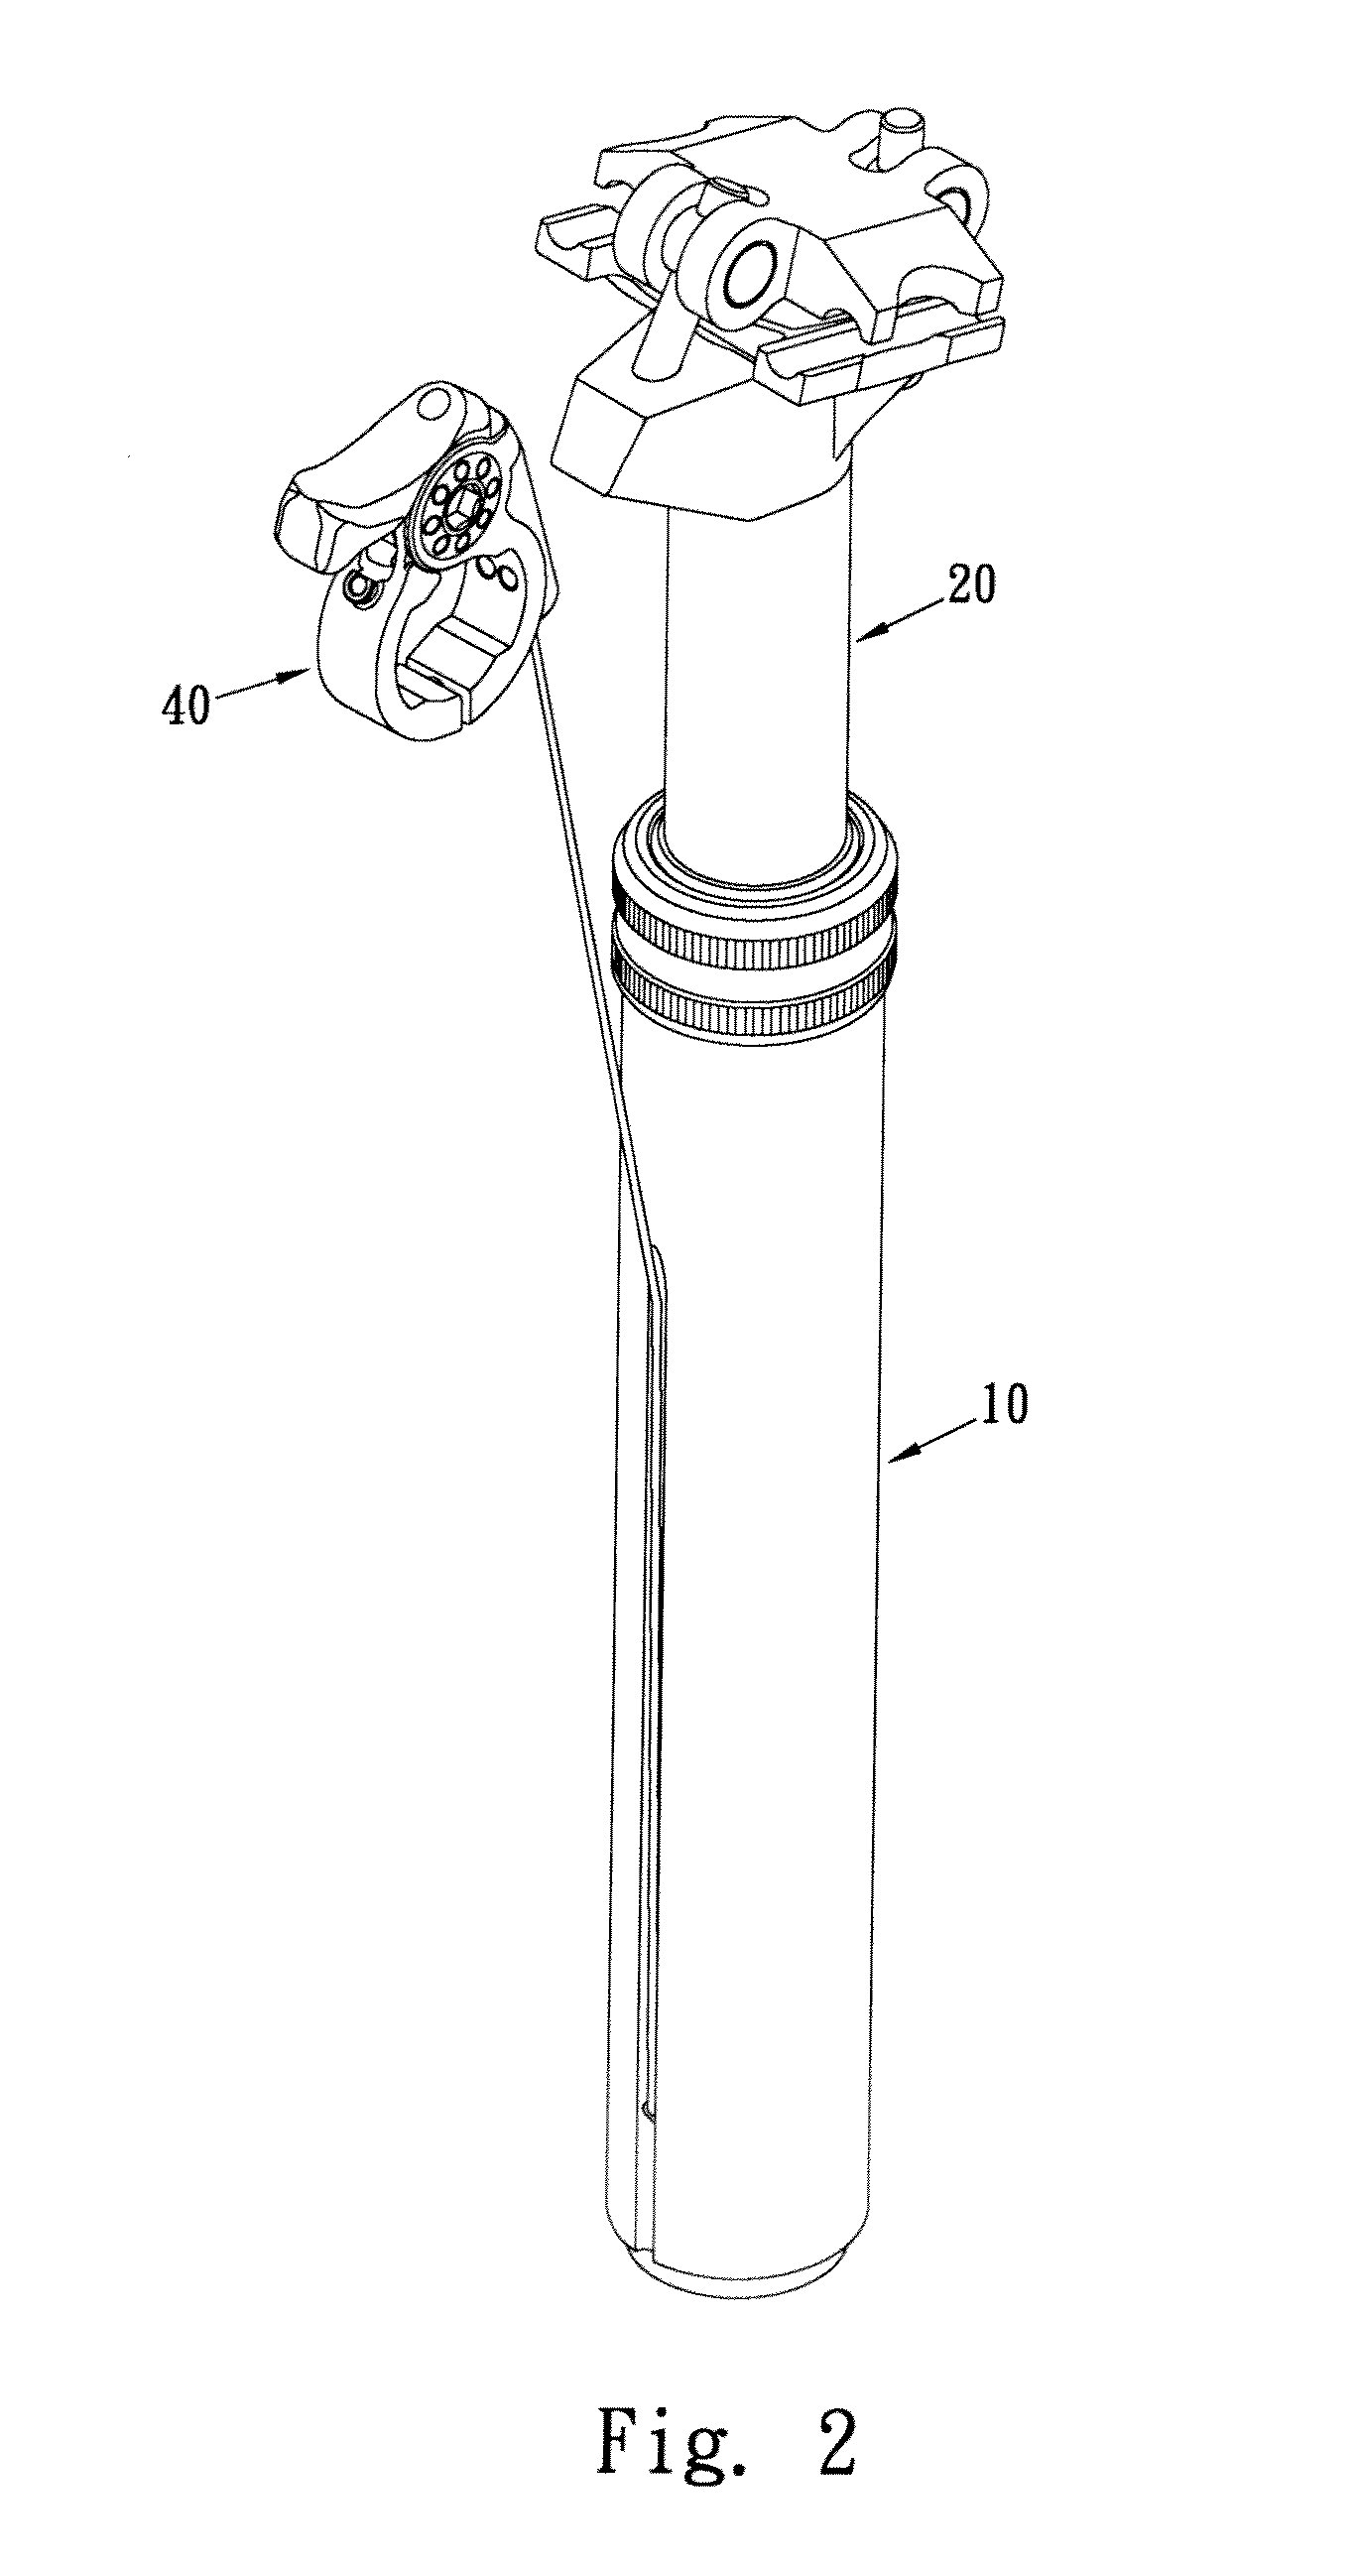 Control device for adjustable bicycle seat